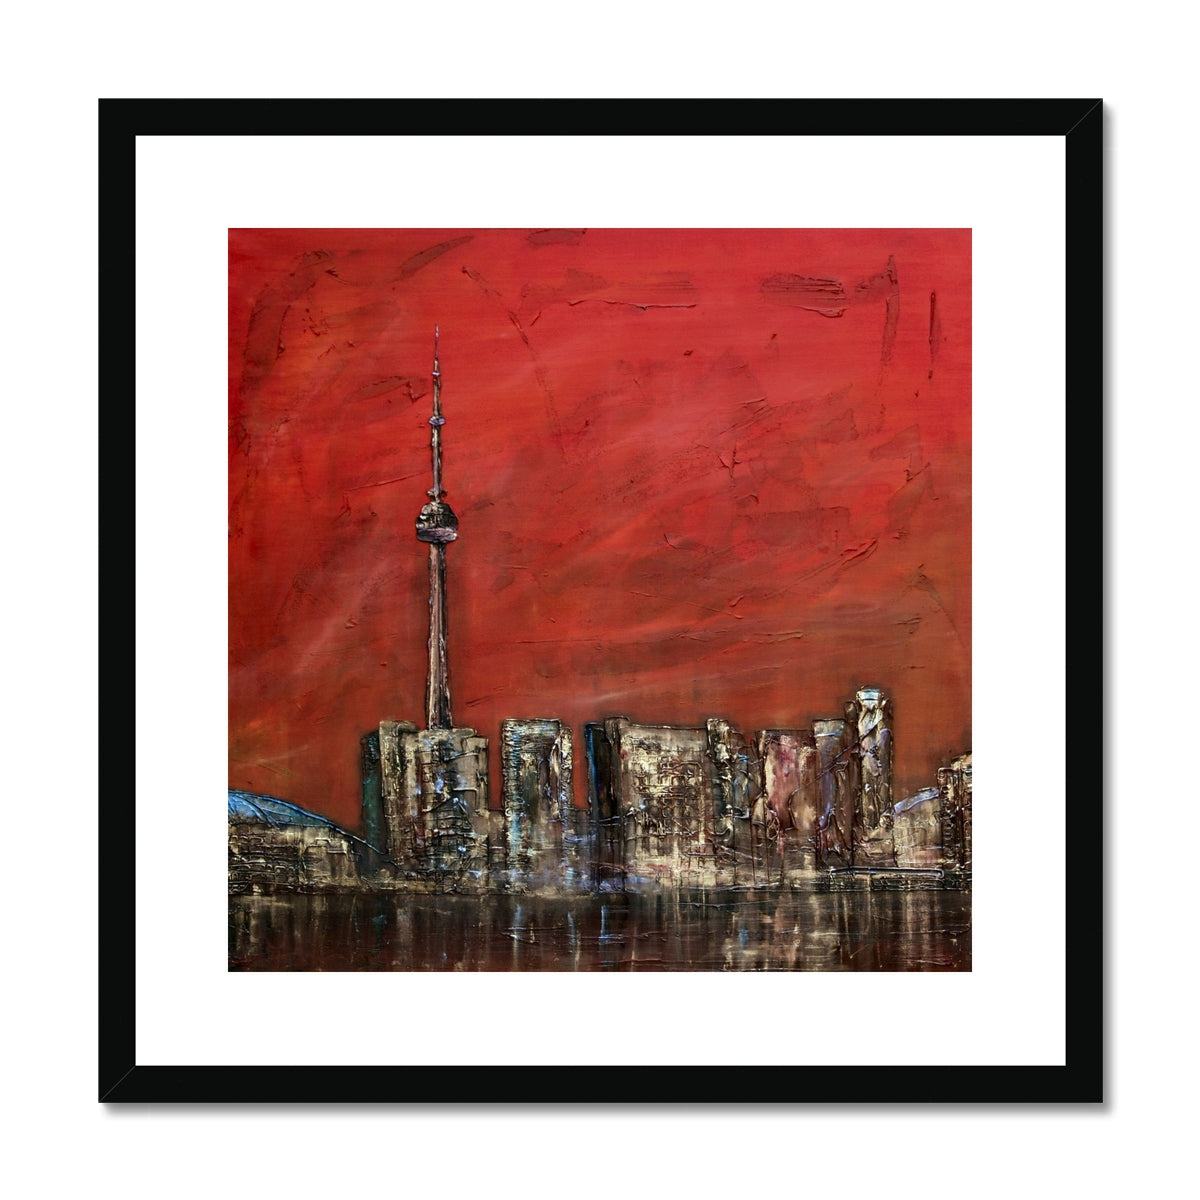 Toronto Sunset Painting | Framed & Mounted Prints From Scotland-Framed & Mounted Prints-World Art Gallery-20"x20"-Black Frame-Paintings, Prints, Homeware, Art Gifts From Scotland By Scottish Artist Kevin Hunter